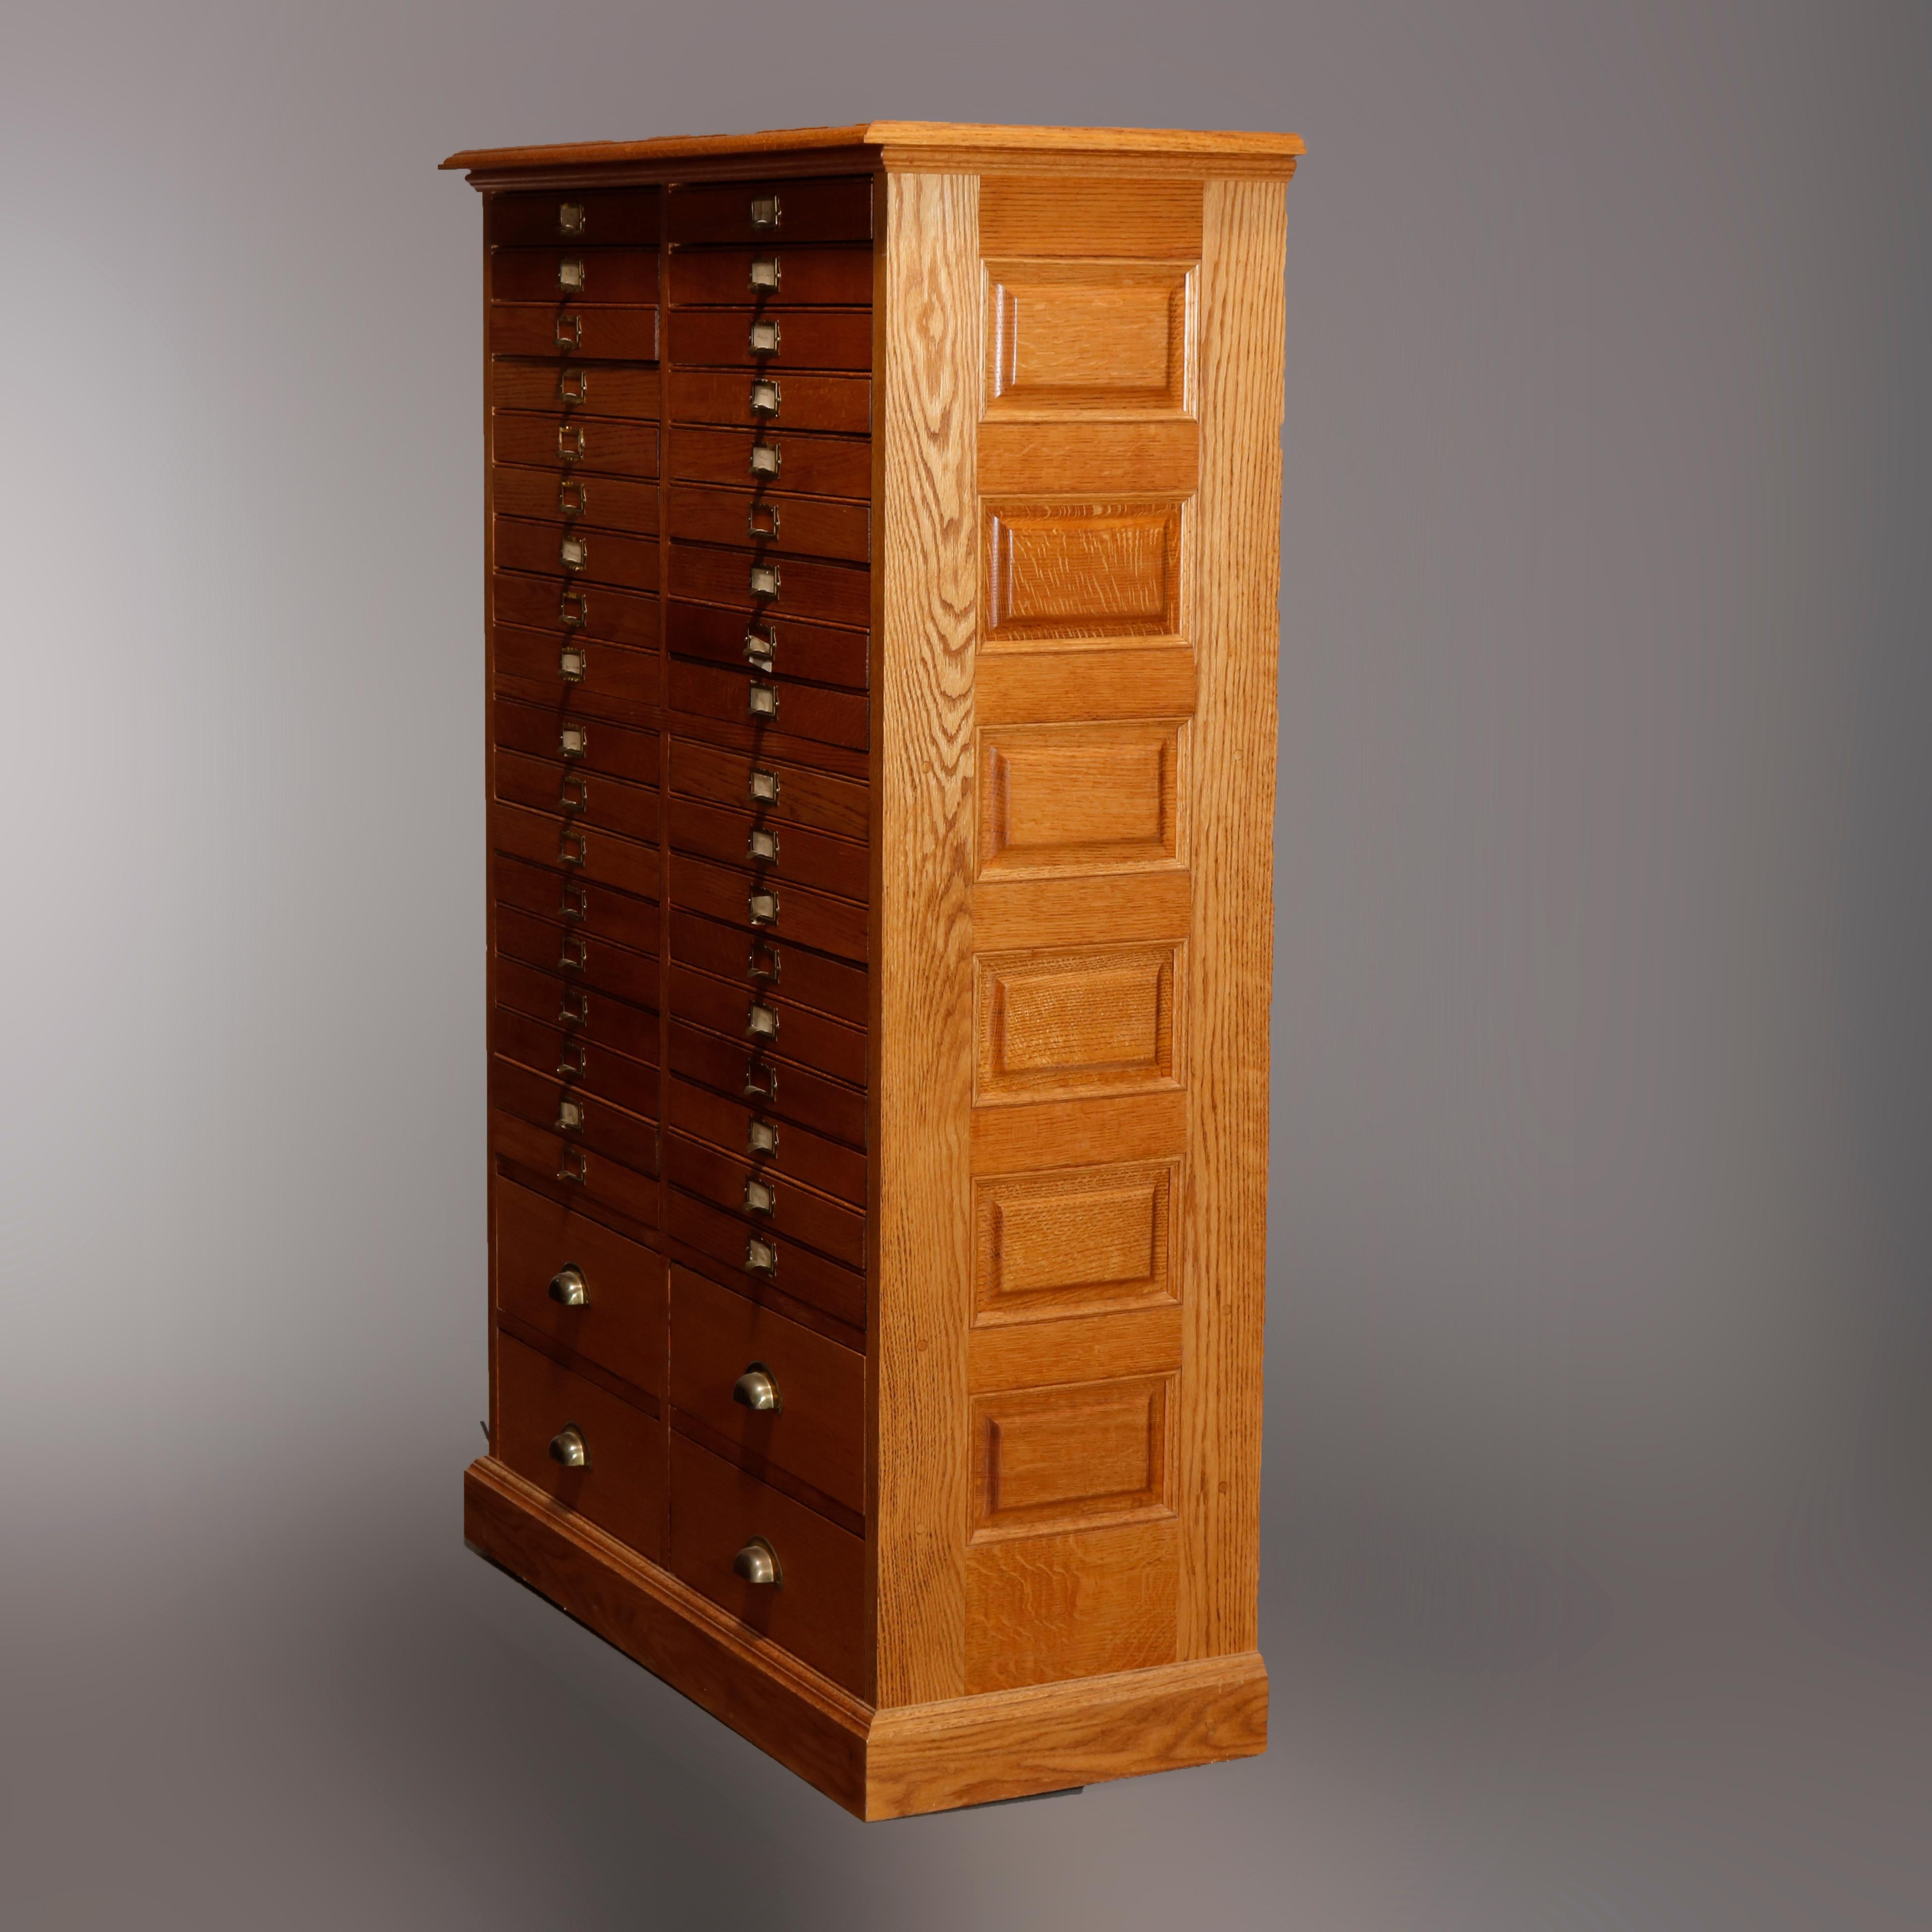 An antique print or map cabinet offers raised panel oak construction with 40 drawers, 20th century

Measures- 58.5